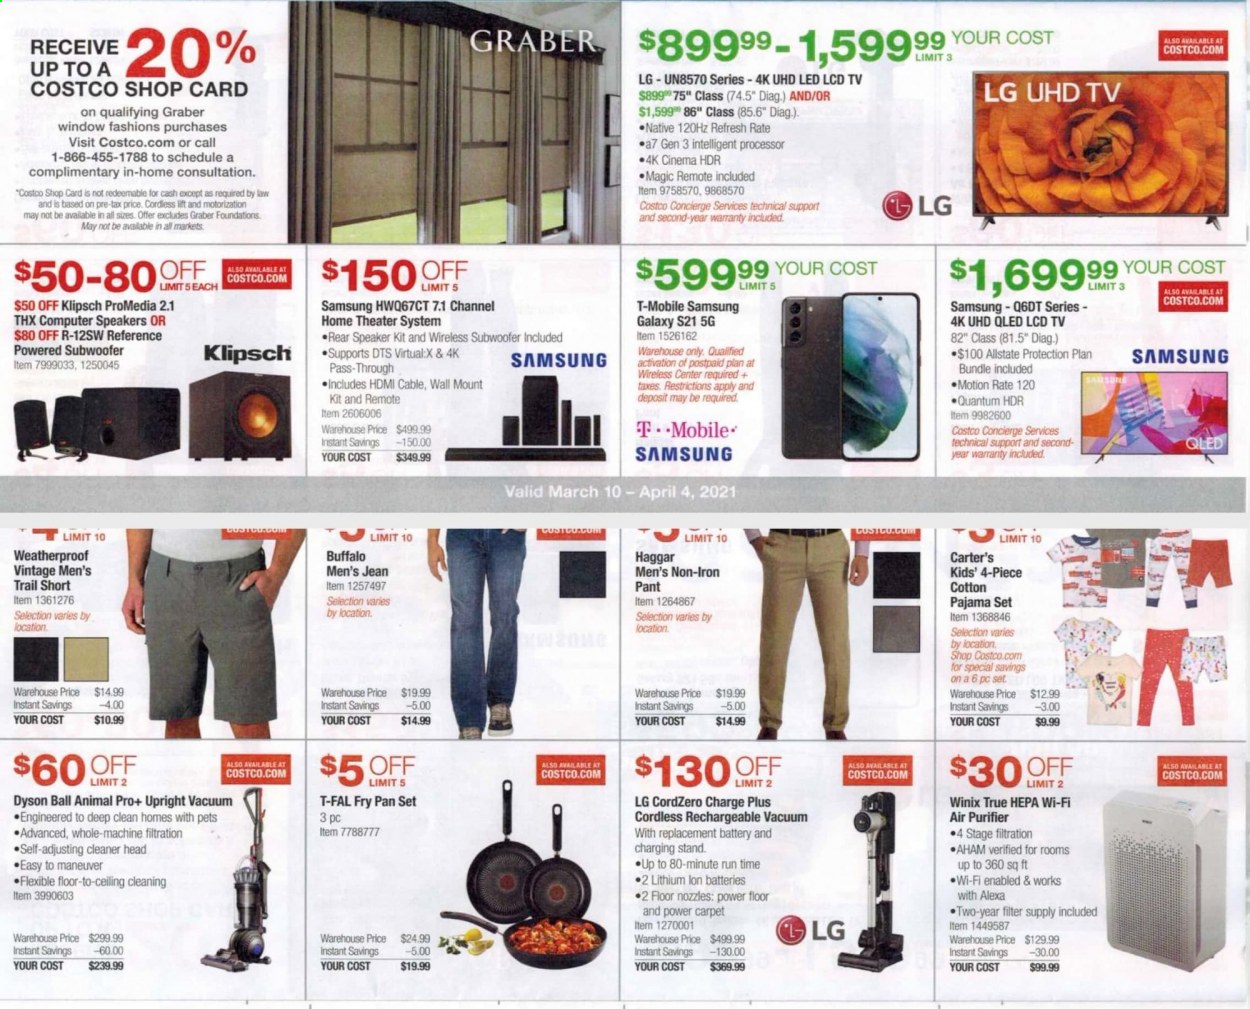 thumbnail - Costco Flyer - 03/10/2021 - 04/04/2021 - Sales products - LG, Samsung Galaxy, cleaner, pan, battery, Samsung, Samsung Galaxy S, Samsung Galaxy S21, charging stand, computer, HDMI cable, UHD TV, TV, home theater, speaker, subwoofer, wireless subwoofer, air purifier, Dyson, vacuum cleaner, iron. Page 5.